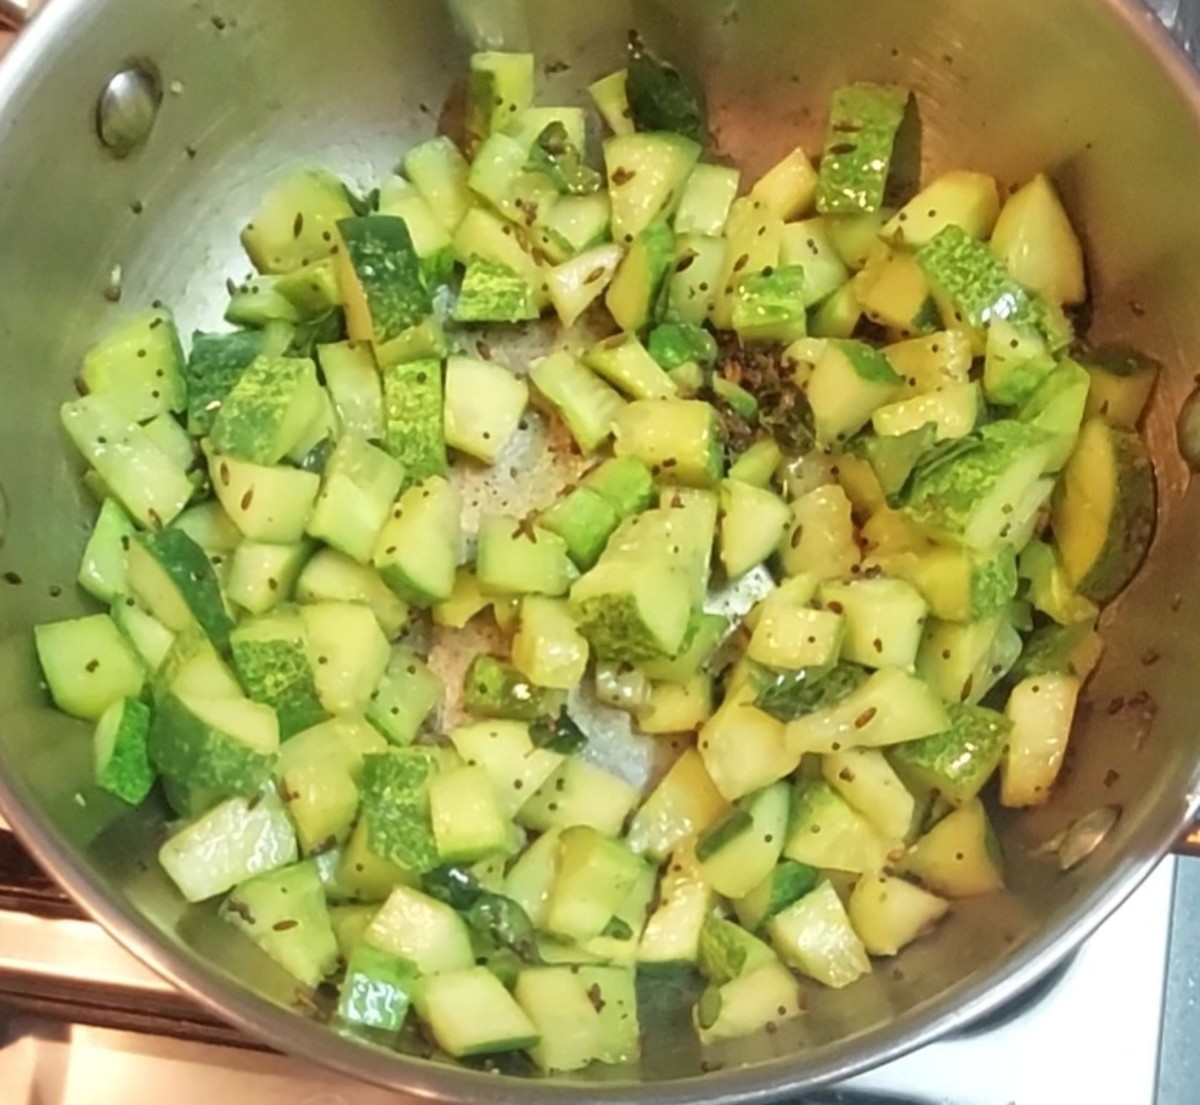 Saute well for 1-2 minutes (cucumber starts to shrink). Add salt to taste.